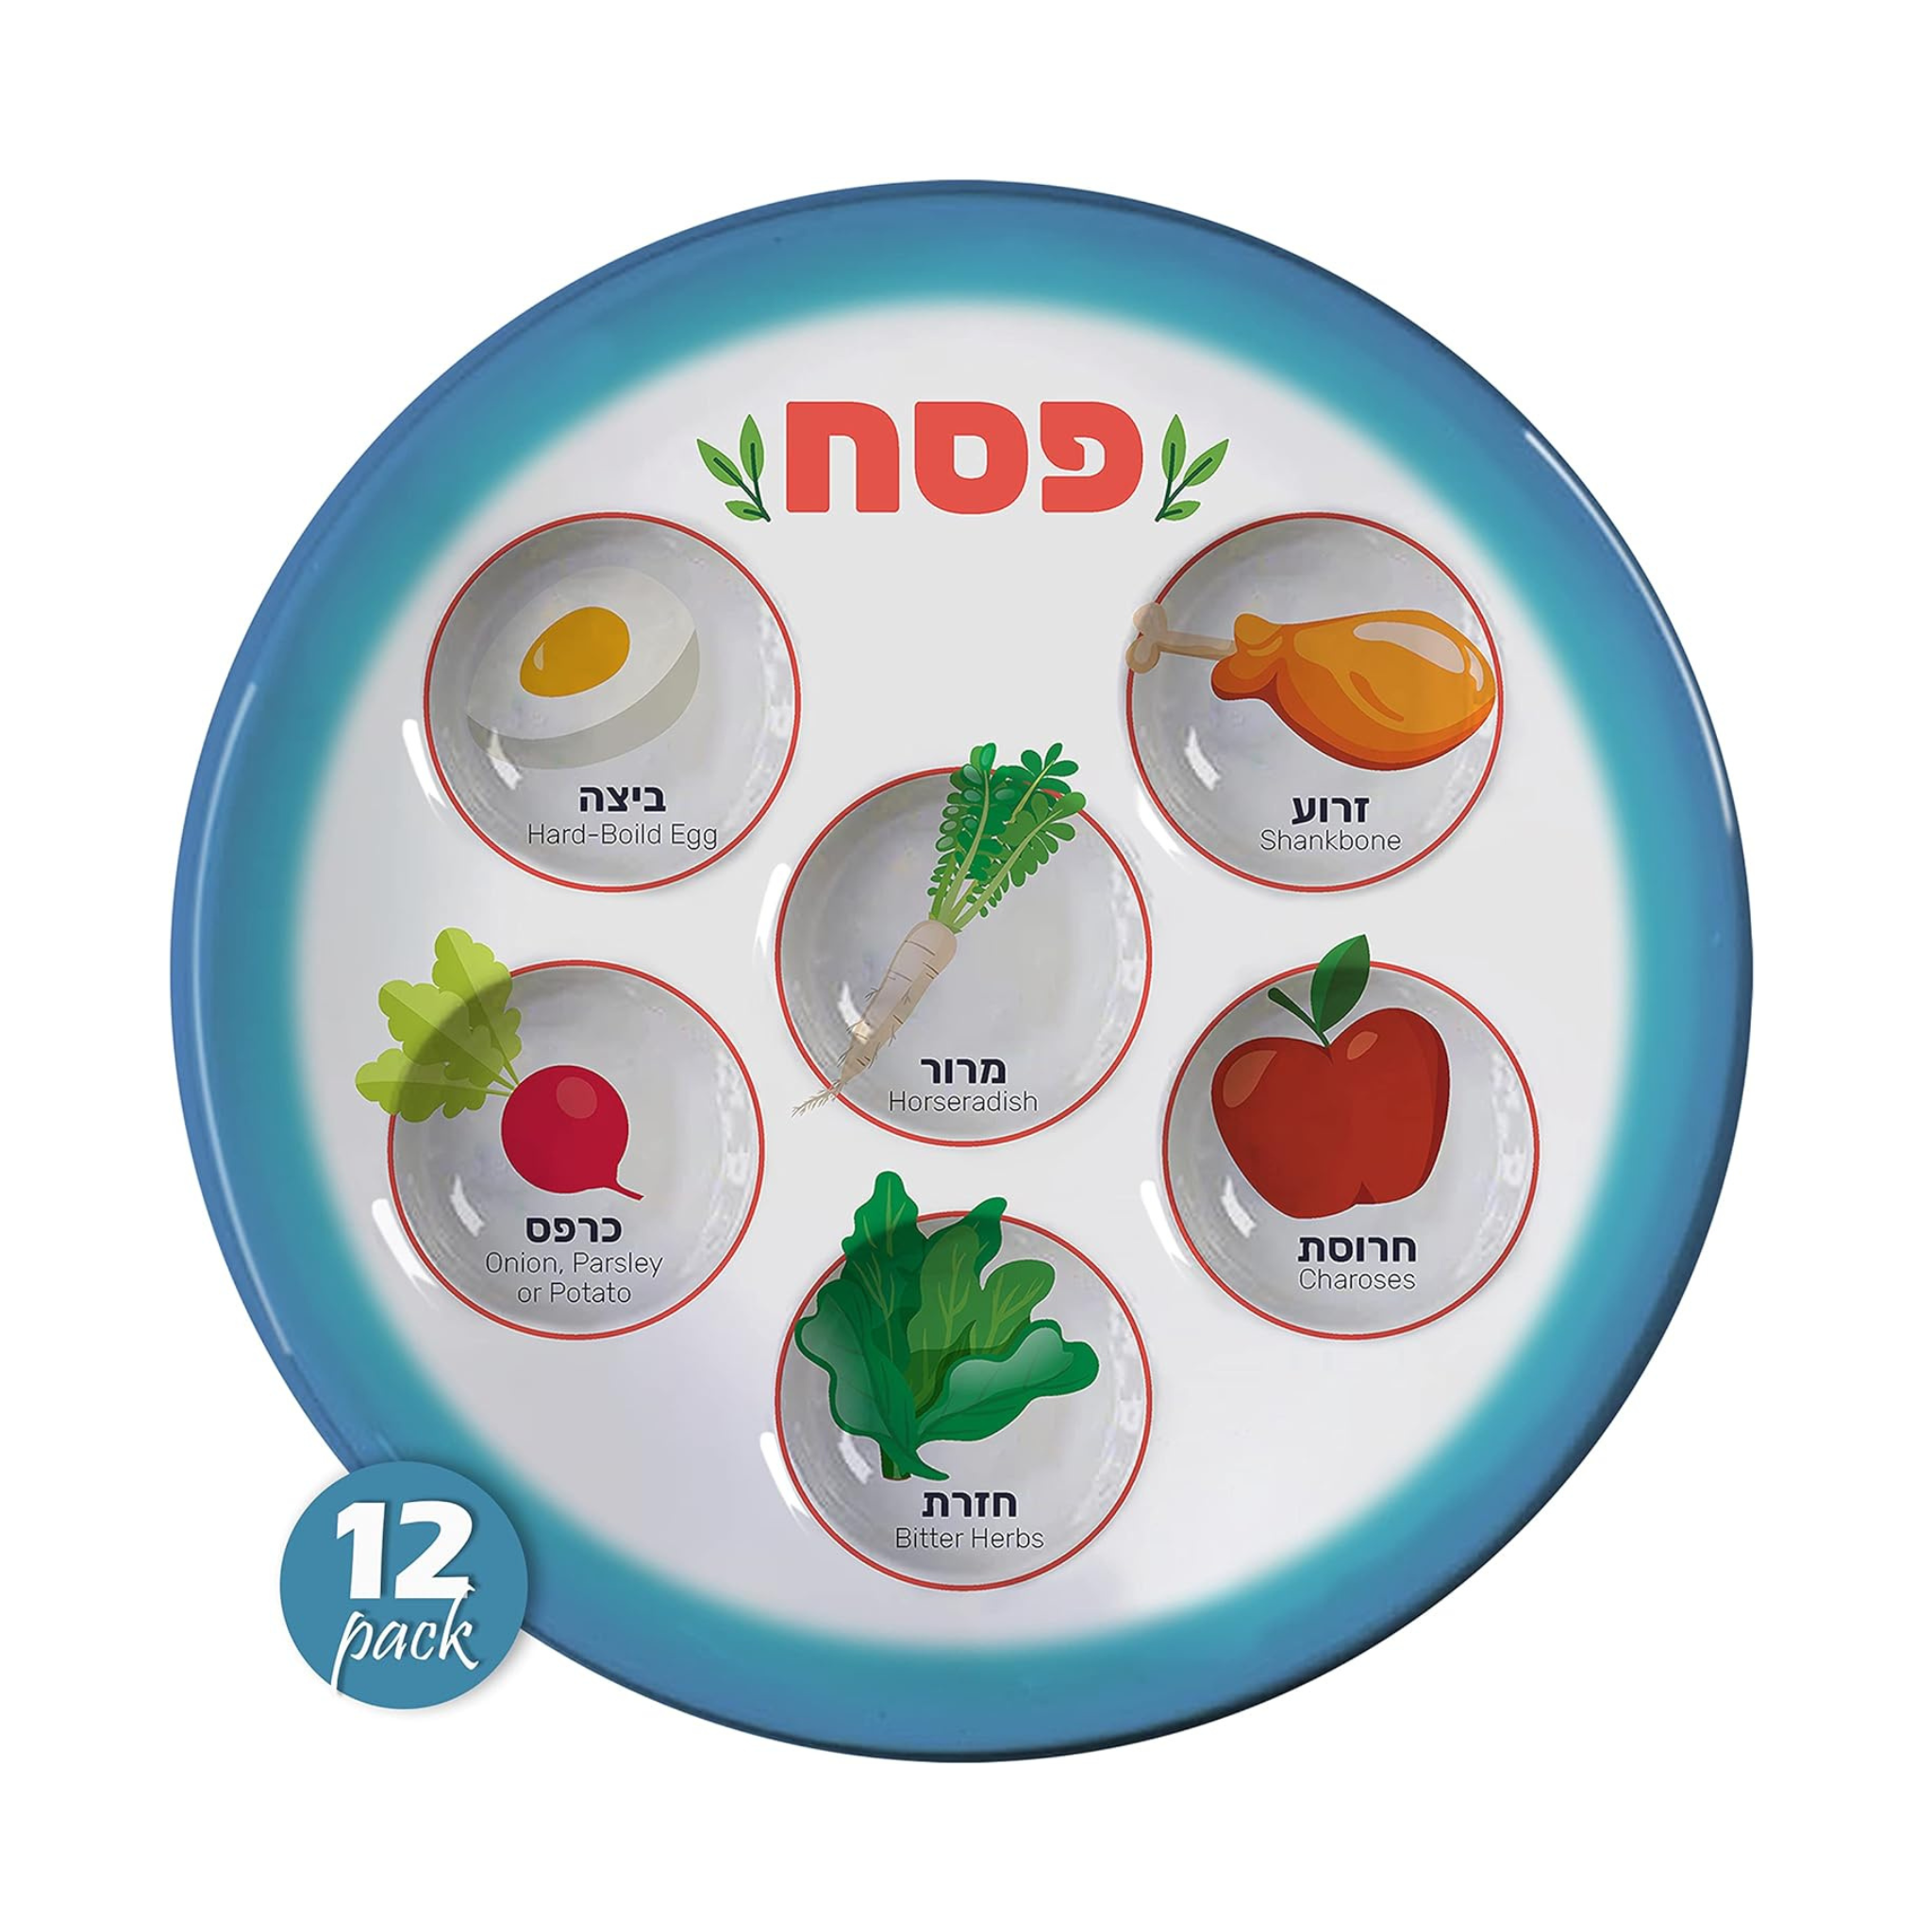 The Kosher Cook Disposable Seder Plates, 12 Pack